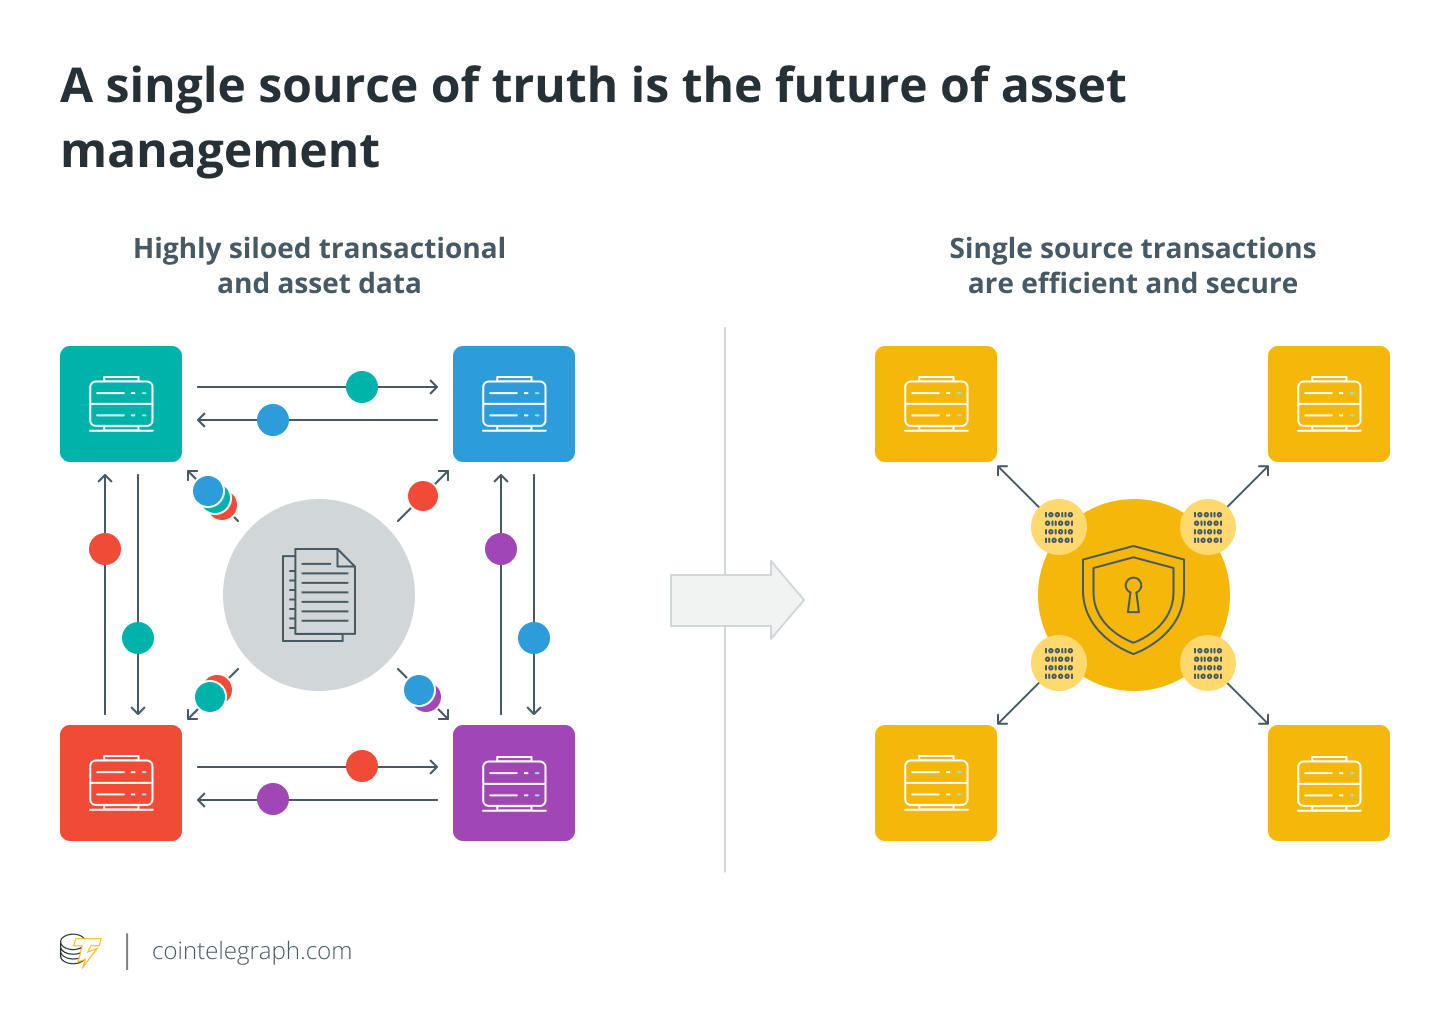 A single source of truth is the future of asset management